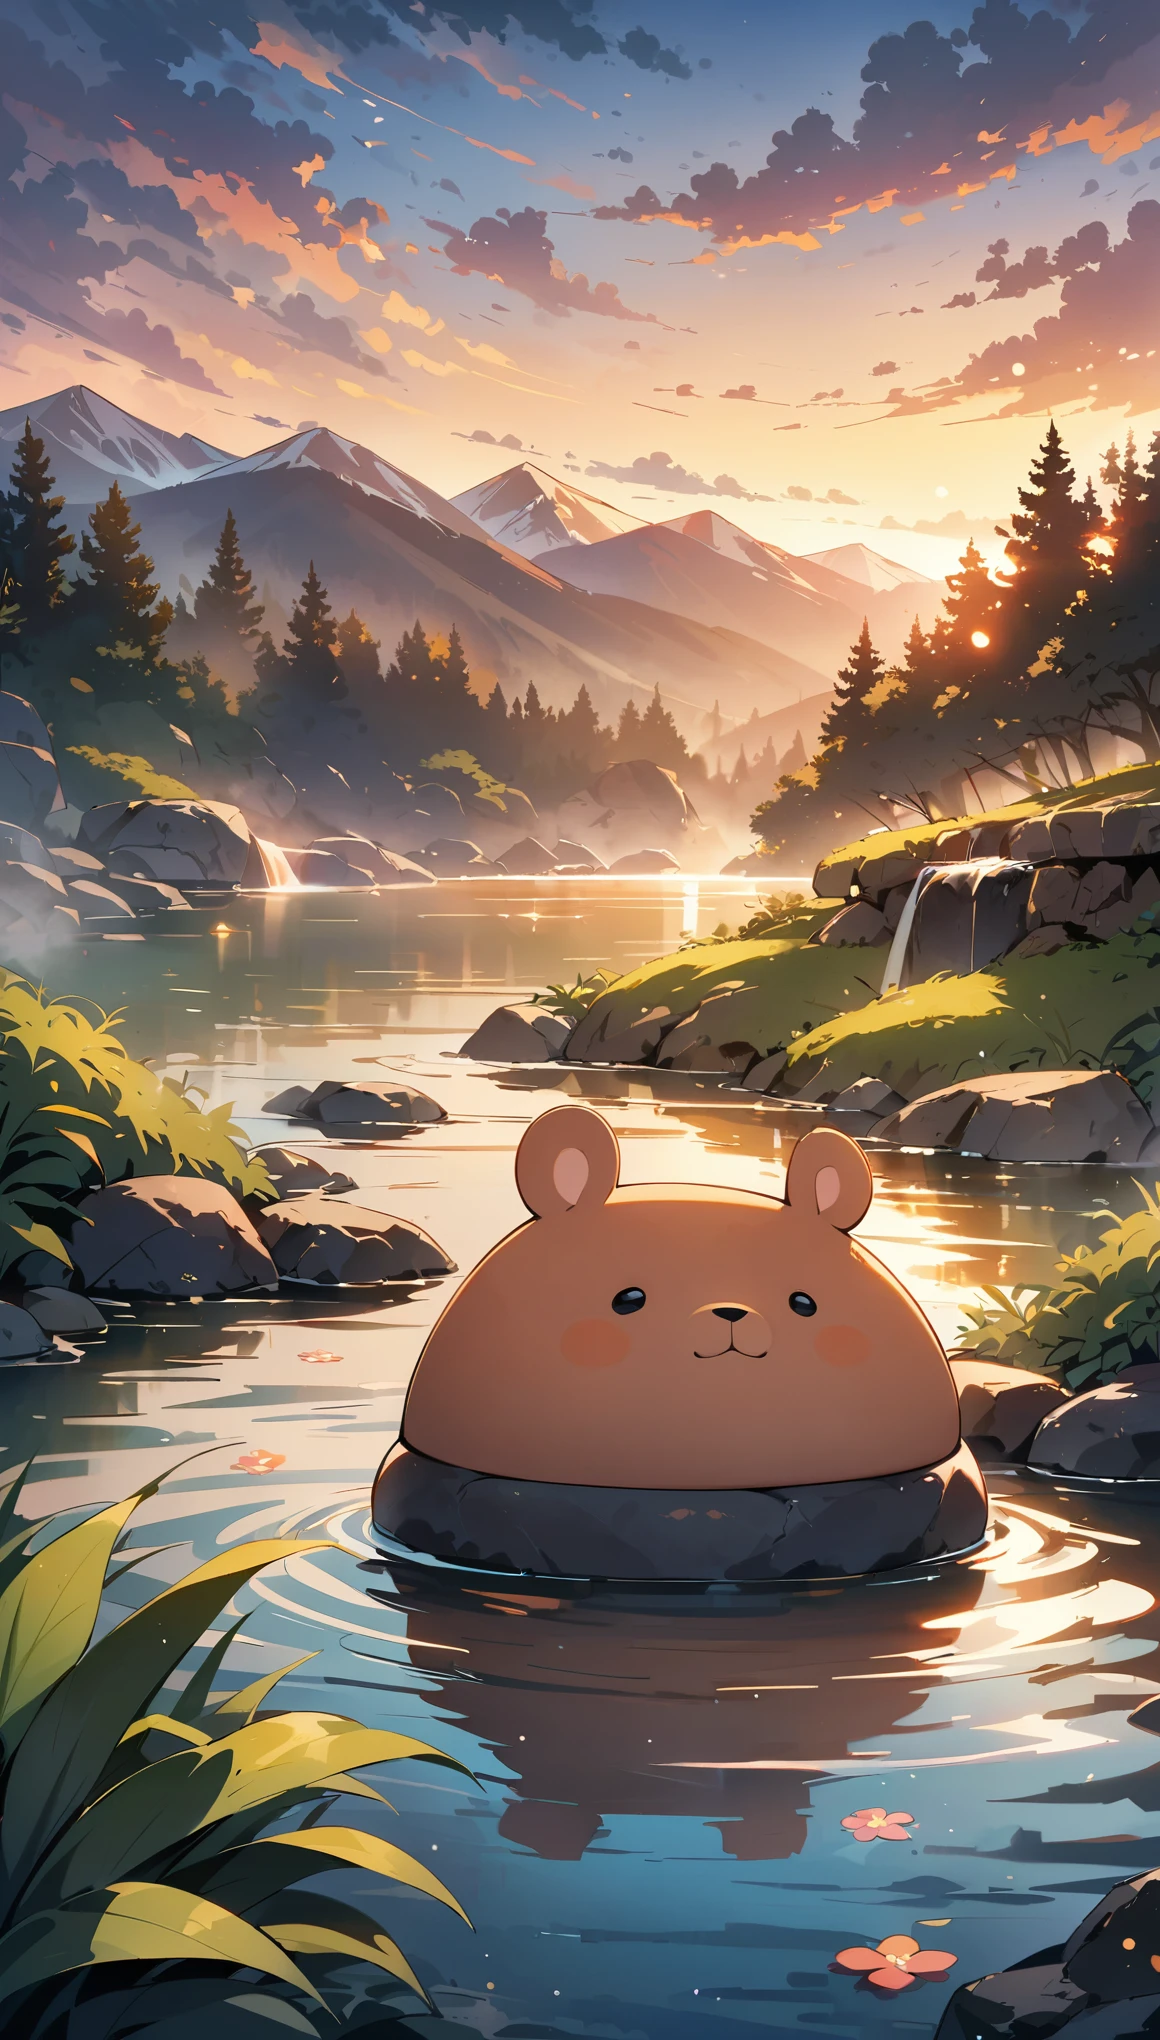 ((Hot springs with capybaras))、1 capybara:1.2、Cozy atmosphere、Rising steam、Lush vegetation、Relaxing bath、Calm colors、Ripples on a calm water surface、Calm atmosphere tranquility、A faint mist in the air、A sense of harmony and serenity、A delightful encounter with nature、A relaxing experience、A moment of blissful escape。 (highest quality、4k、8k、High resolution、masterpiece: 1.2)、Super detailed、(Chibi: 1.37)、Bright colors、Bokeh。